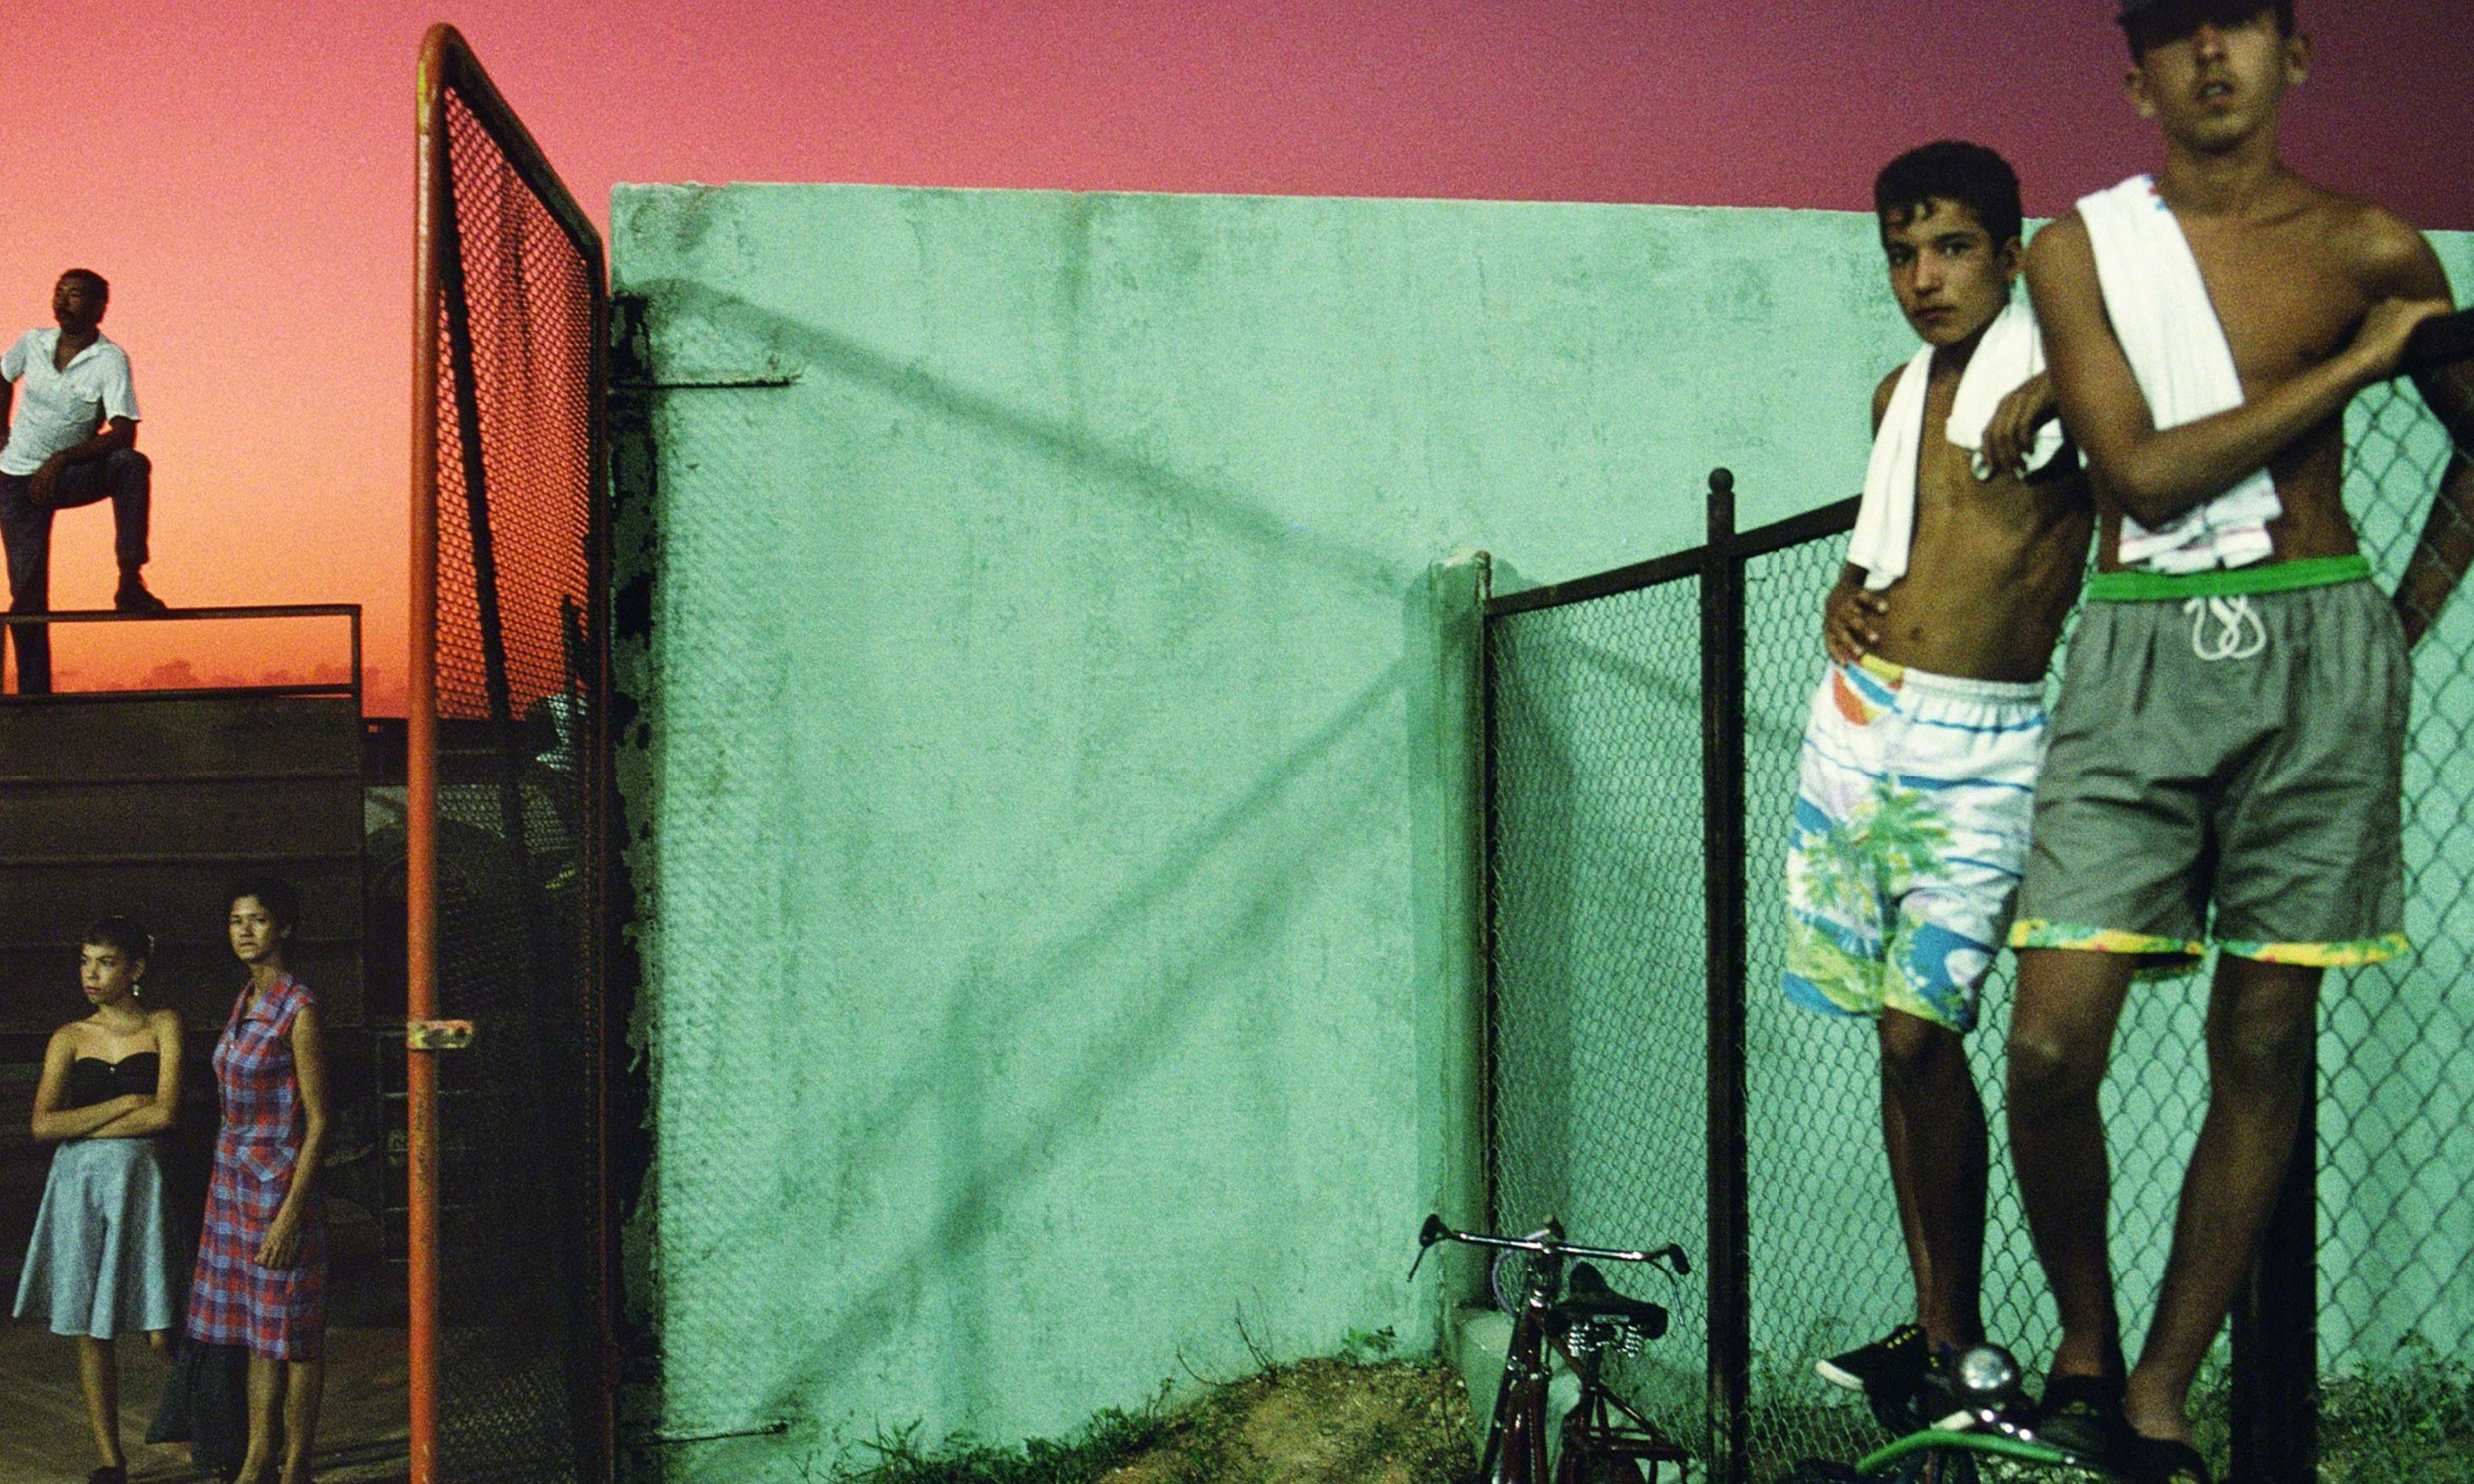 The Greats: How Alex Webb Found His Street Photography Style